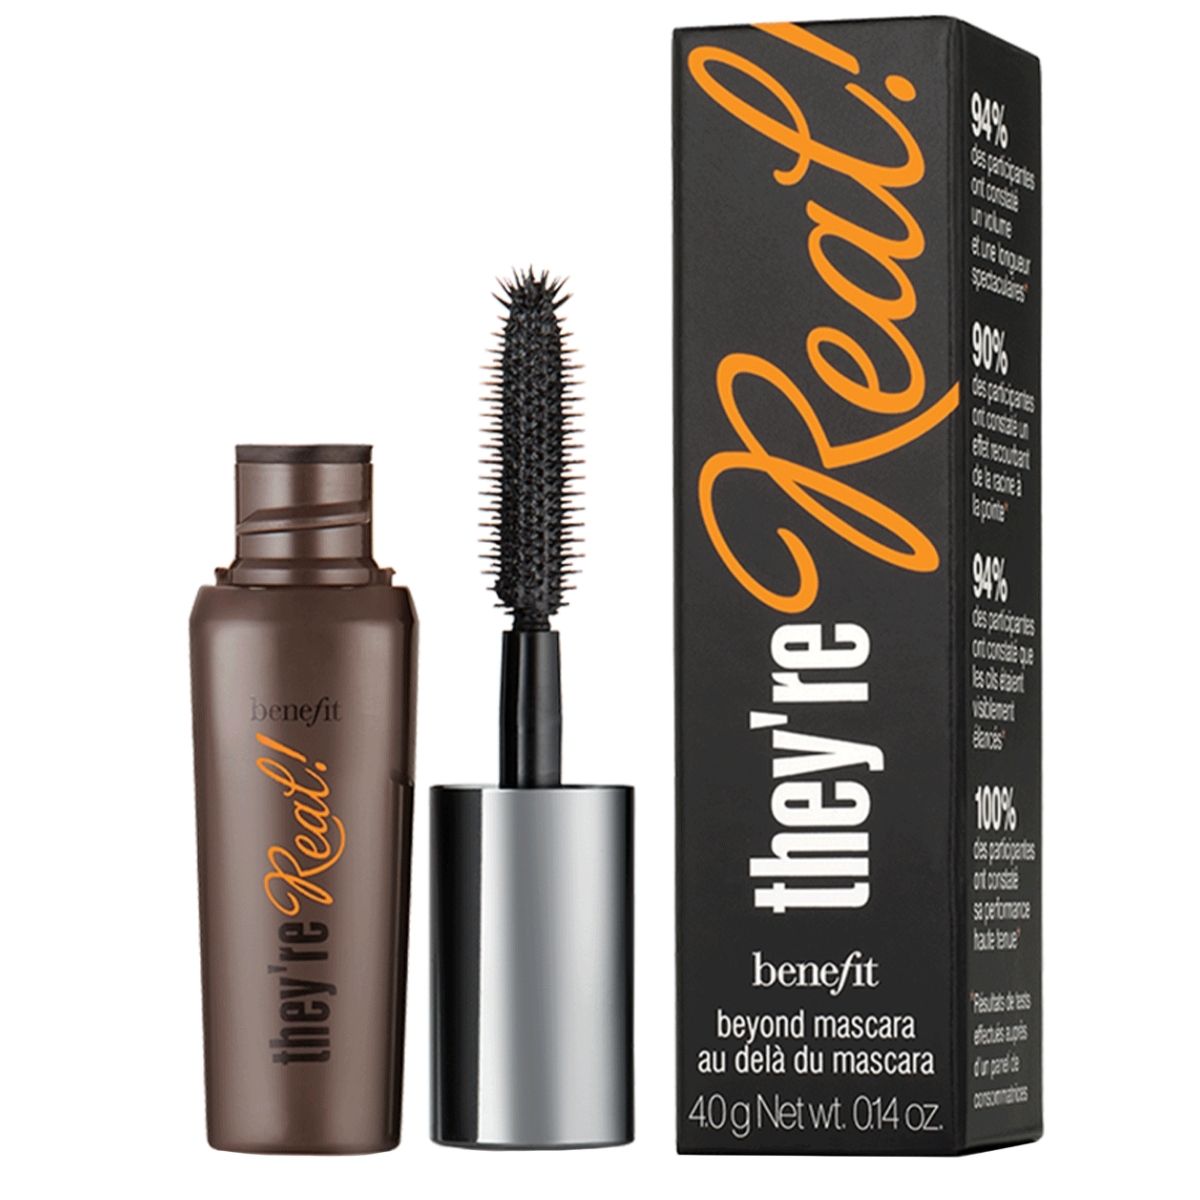 Benefit They're Real! Black Mini Mascara